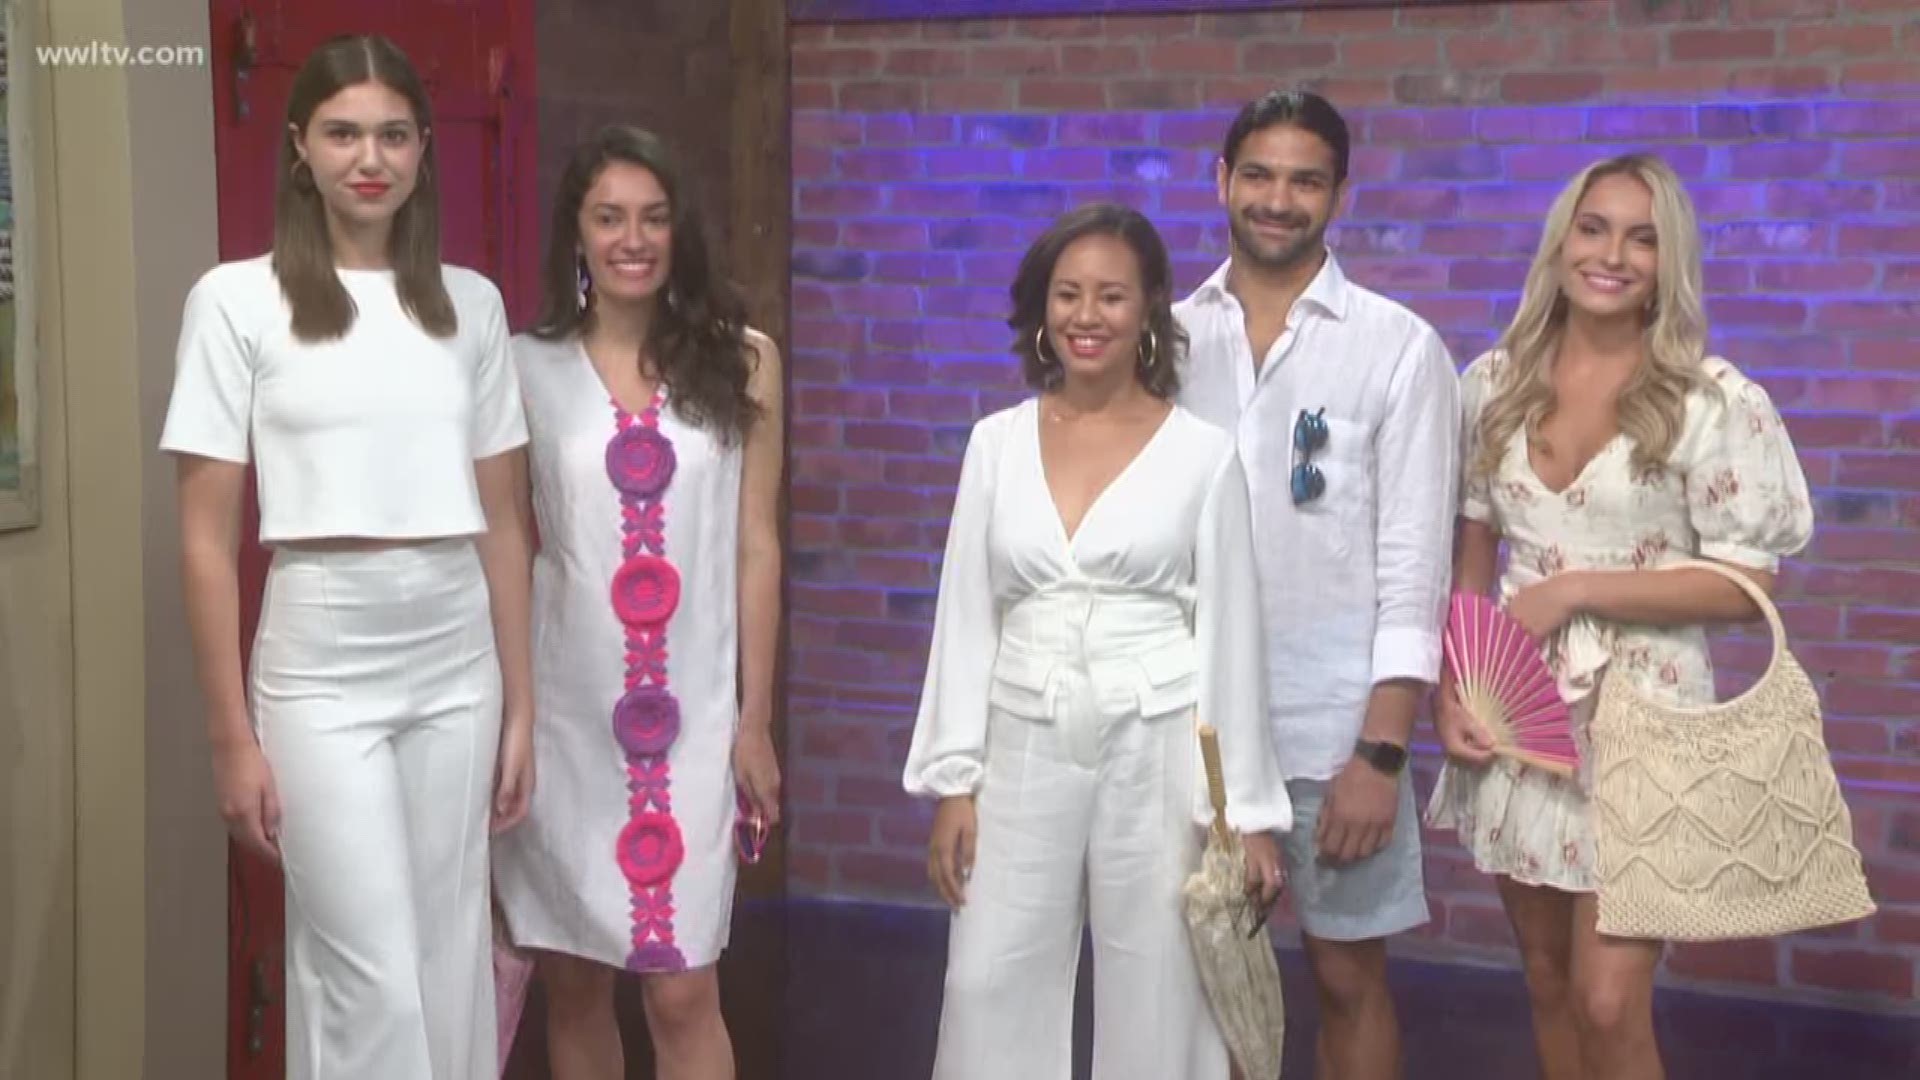 Aimee Gowland is here from ALG Style with some stylish ideas for White Linen Night.